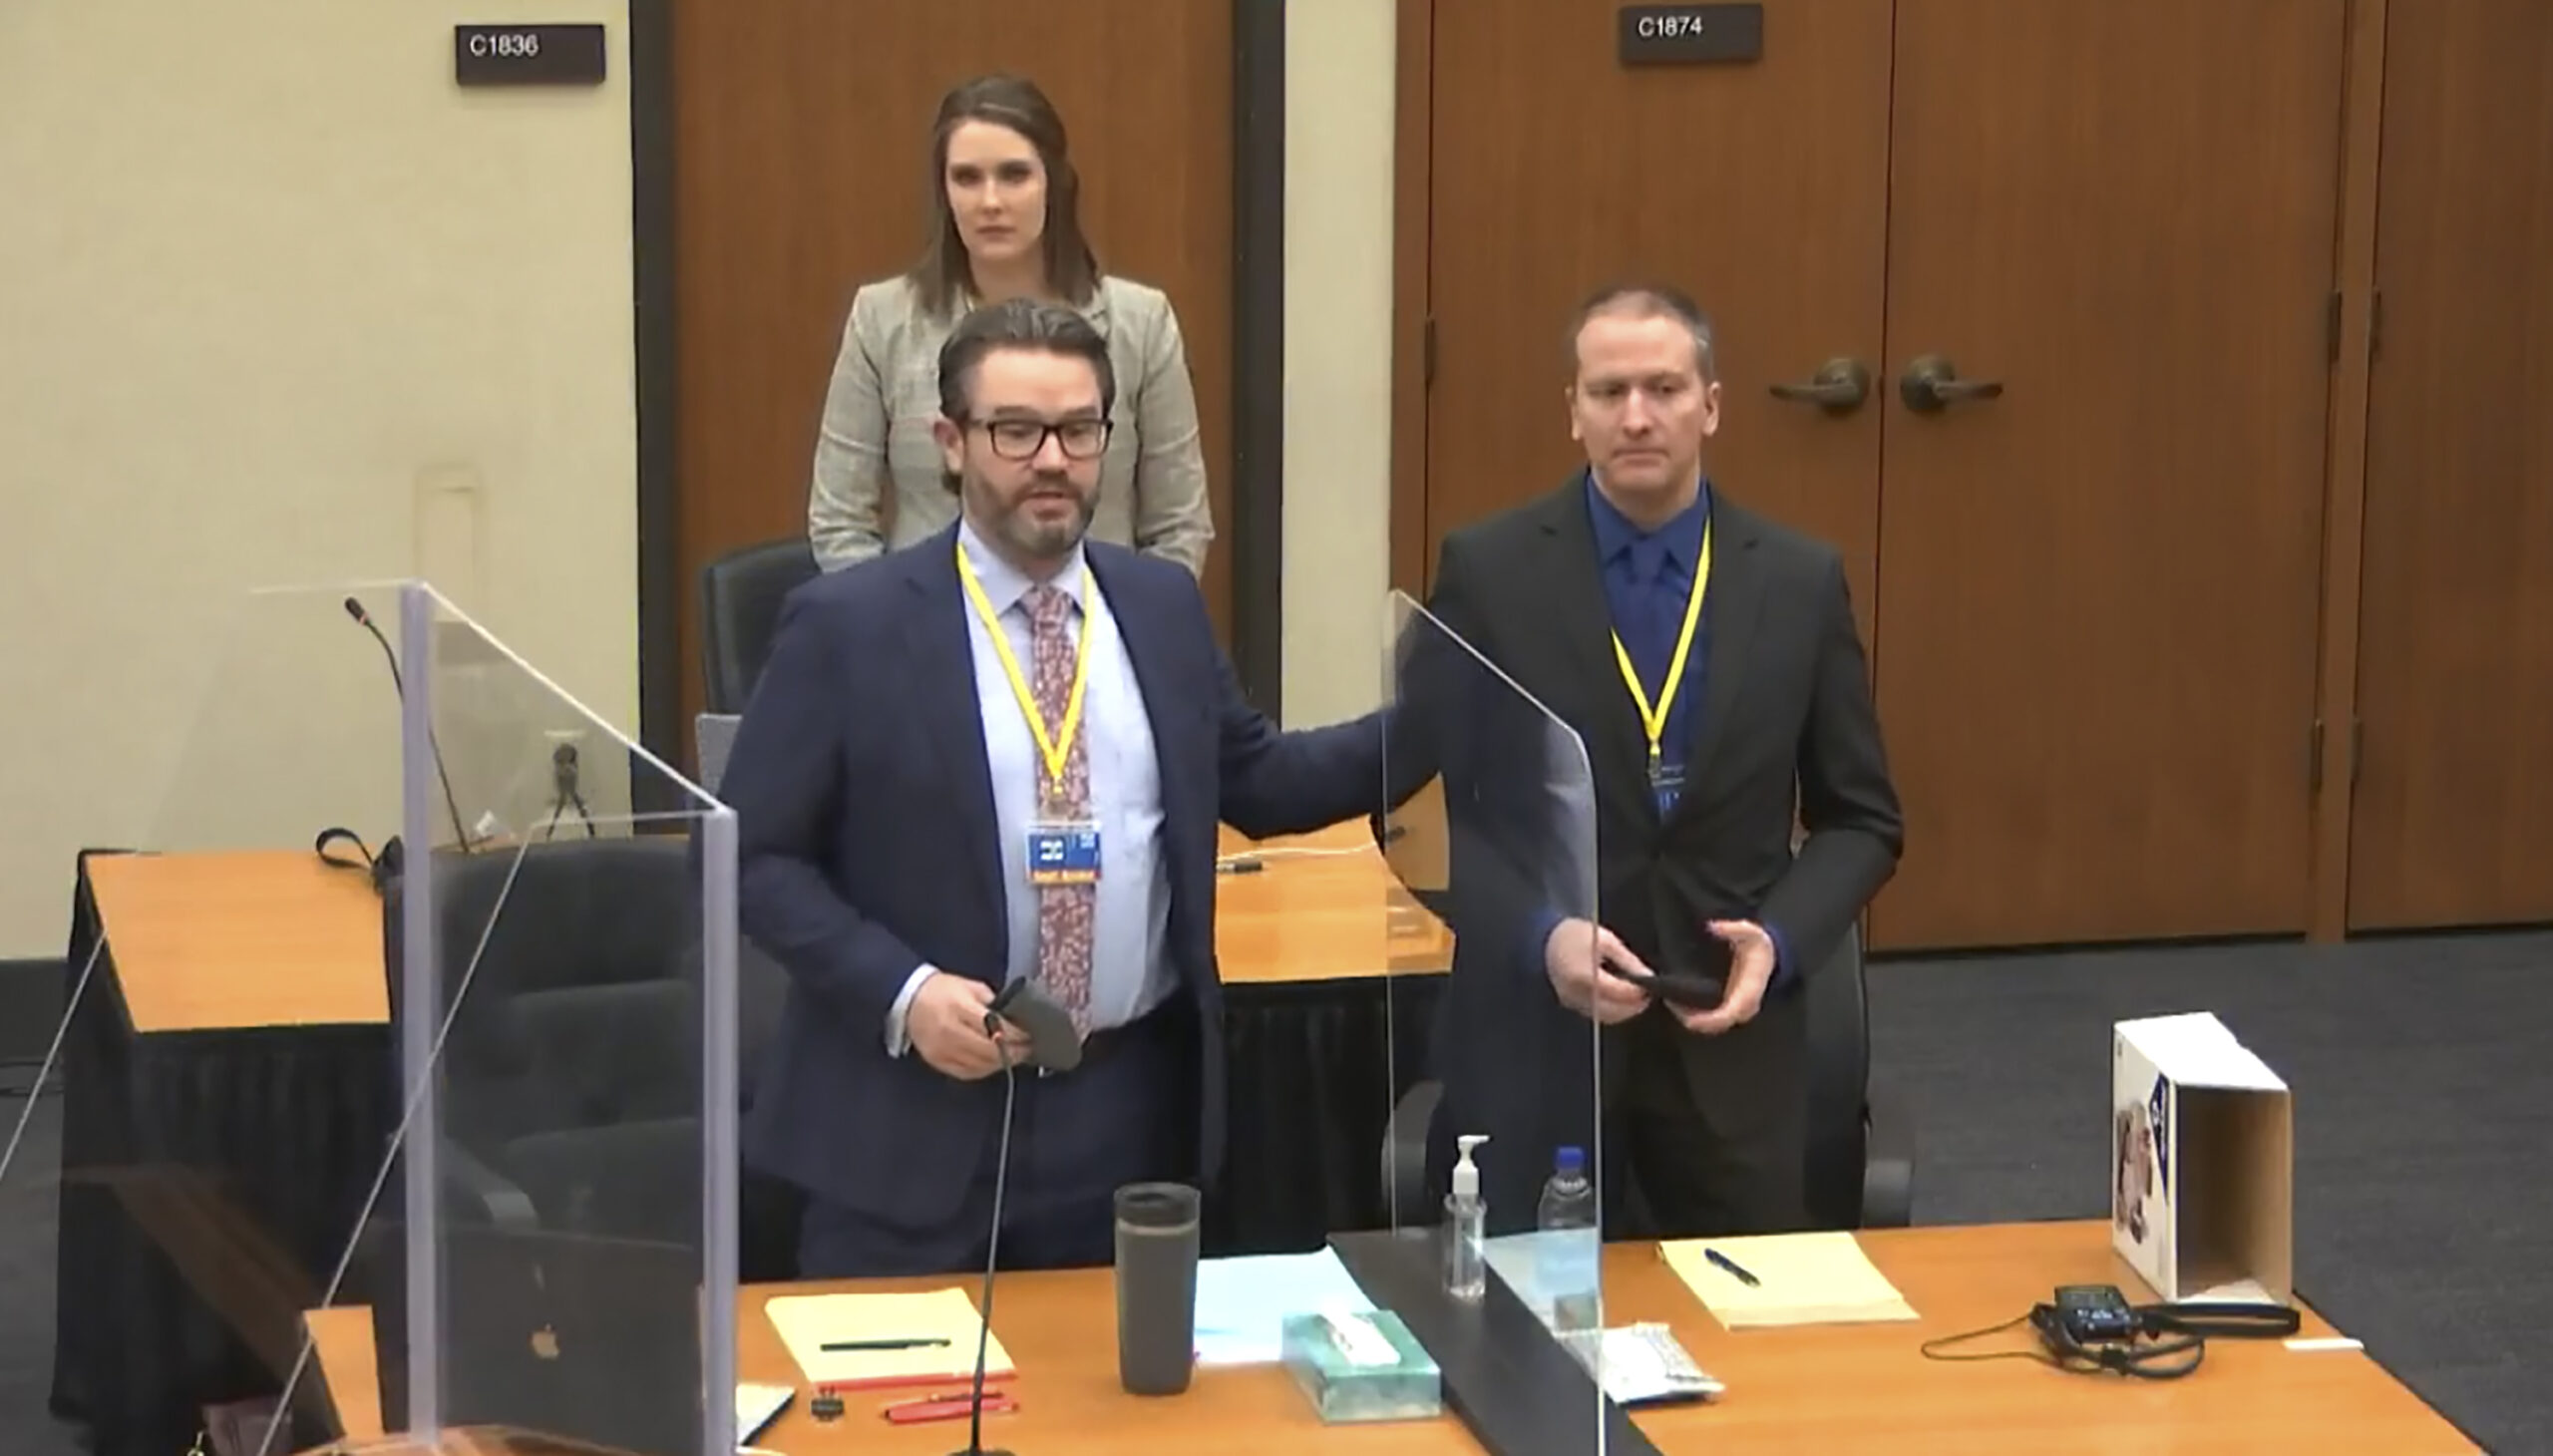 In this screen grab from video, defense attorney Eric Nelson, left, defendant and former Minneapolis police officer Derek Chauvin, right, and Nelson's assistant Amy Voss, back, introduce themselves to potential jurors as Hennepin County Judge Peter Cahill Tuesday, March 23, 2021, presides over jury selection in the trial of Chauvin at the Hennepin County Courthouse in Minneapolis, Minn. Chauvin is charged in the May 25, 2020 death of George Floyd. (Court TV, via AP, Pool)